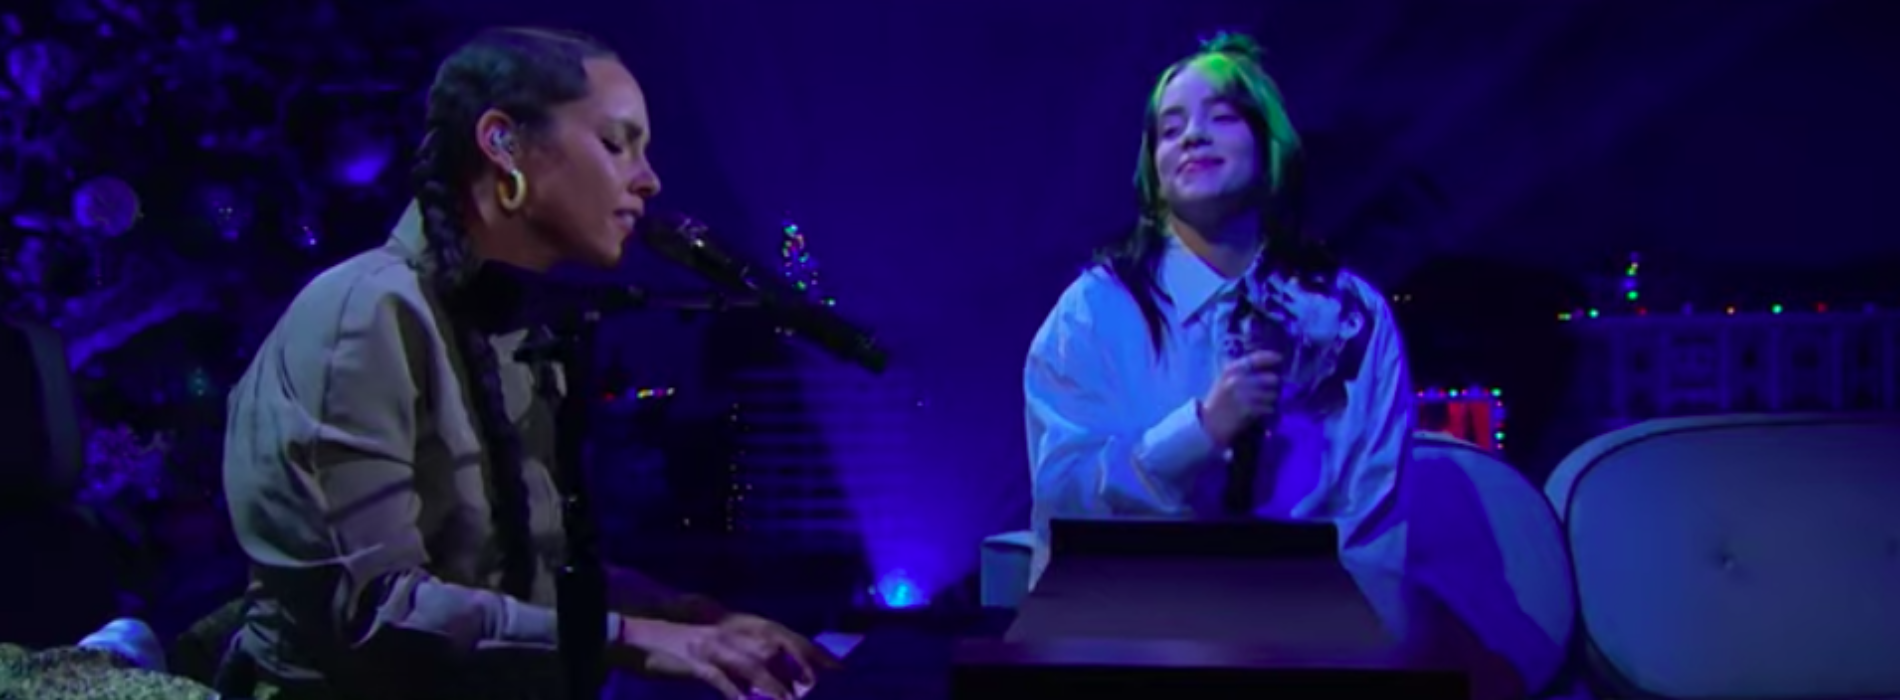 Billie Eilish & Alicia Keys Perform Ocean Eyes The Late Late Show with James Corden   – Décembre 2019